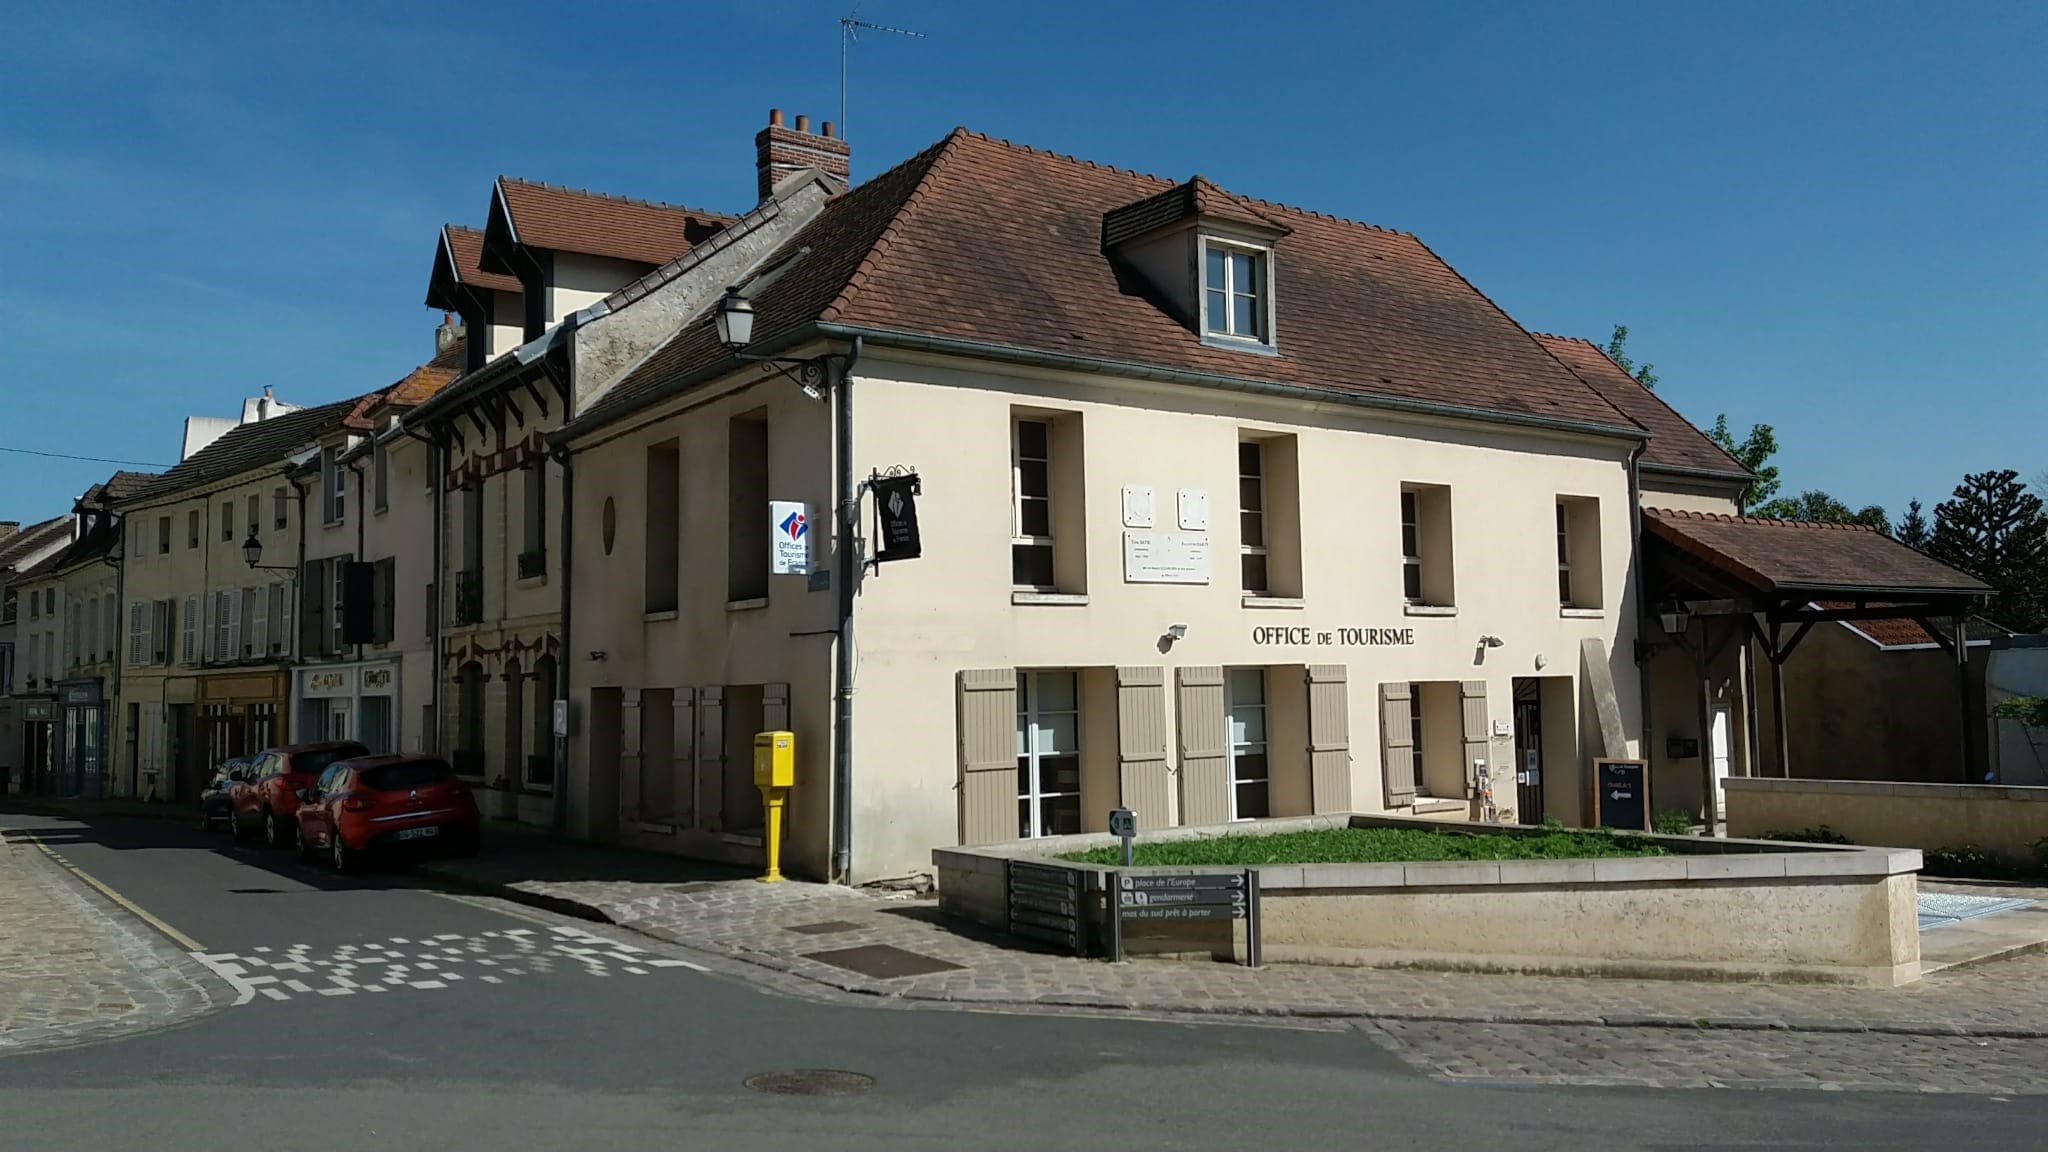 Tourist Information Office of Luzarches